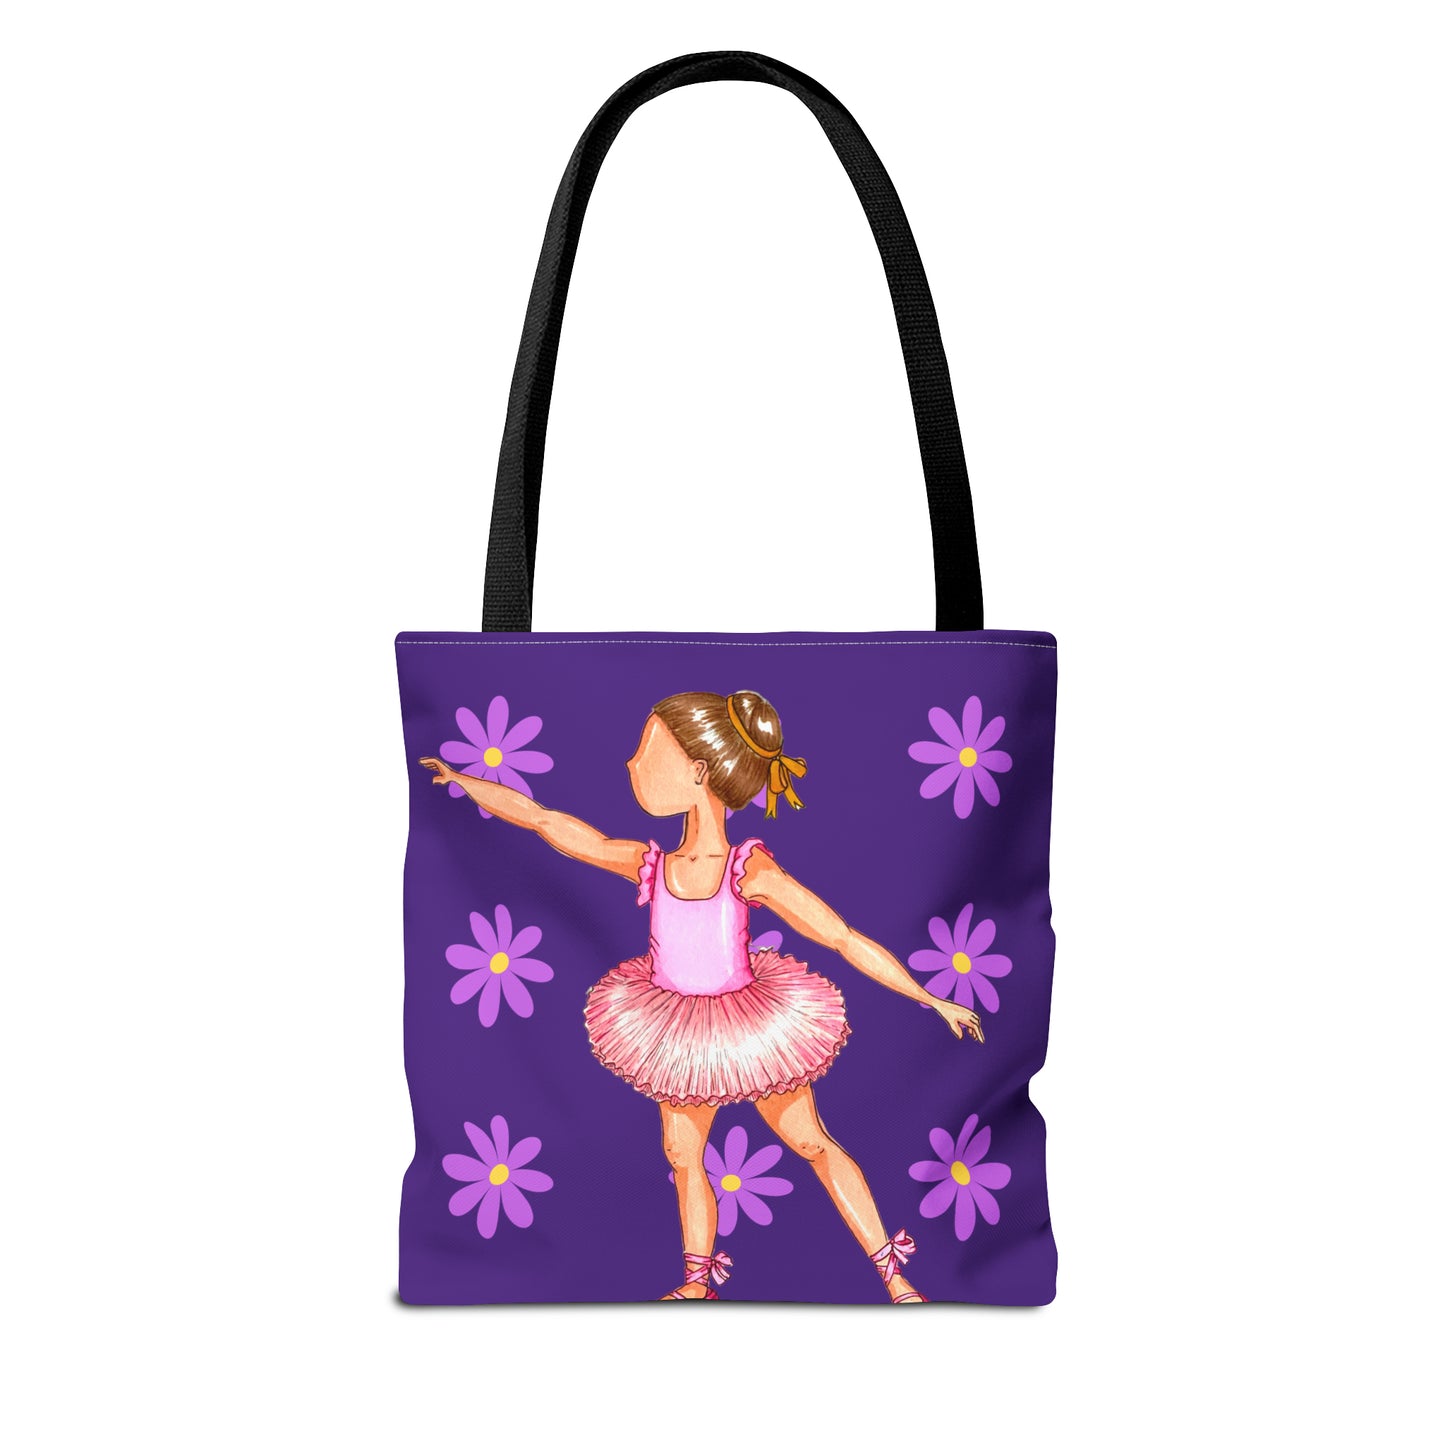 a purple tote bag with a little girl in a pink dress